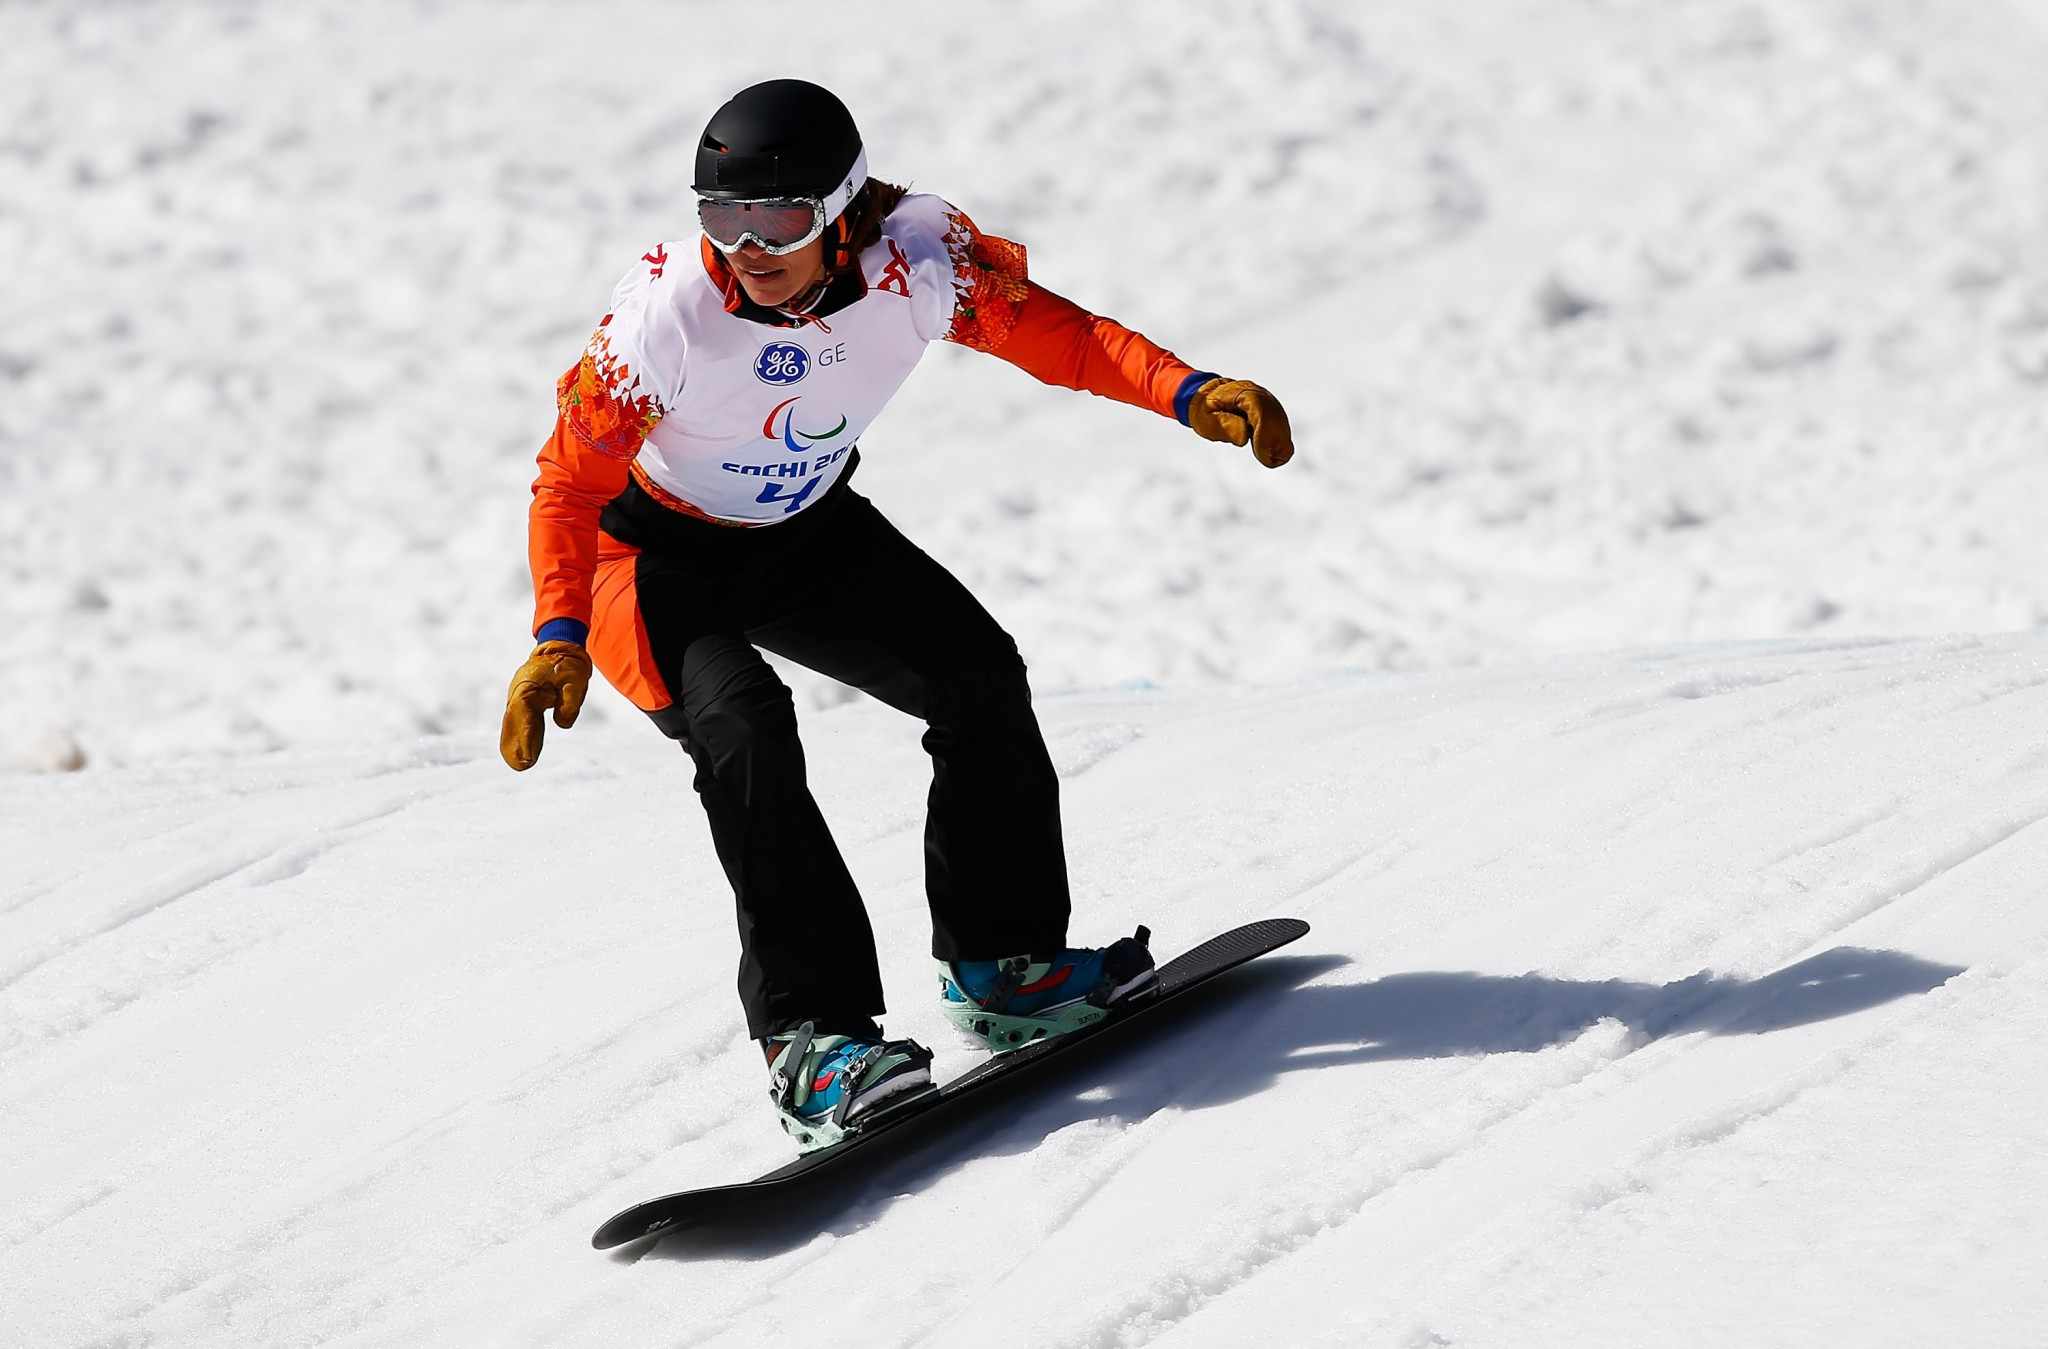 Snowboarder Bibian Mentel-Spee won Netherlands only Parlaympic gold medal at Sochi 2014 ©YouTube